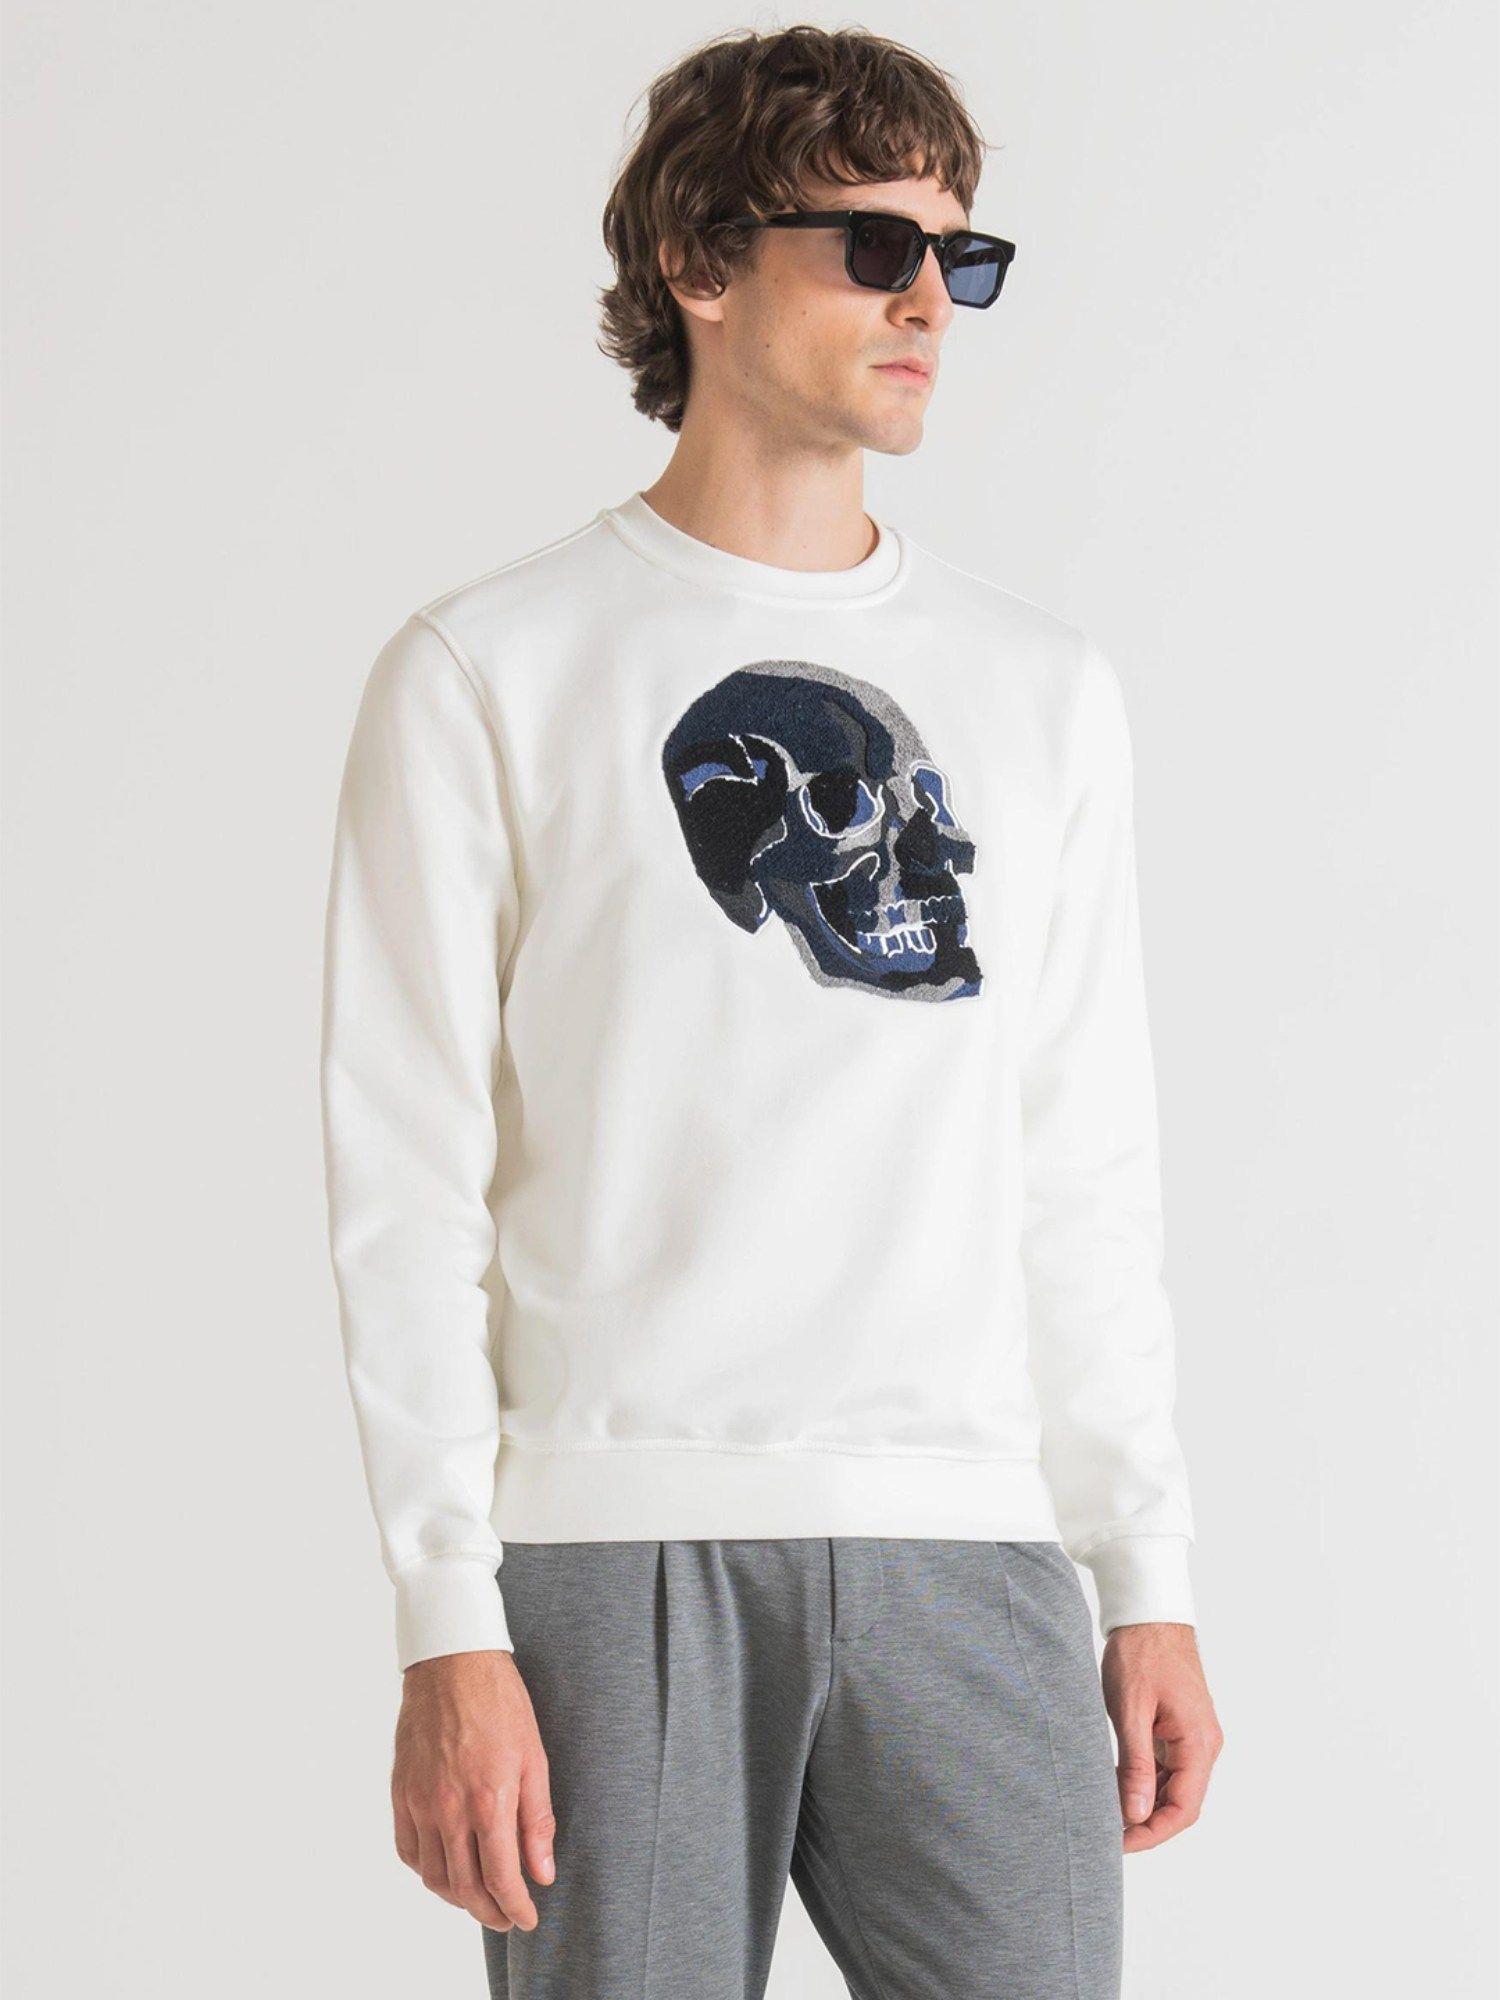 sweatshirt-regular-fit-in-cotton-polyester-blend-fabric-with-embroidered-skull